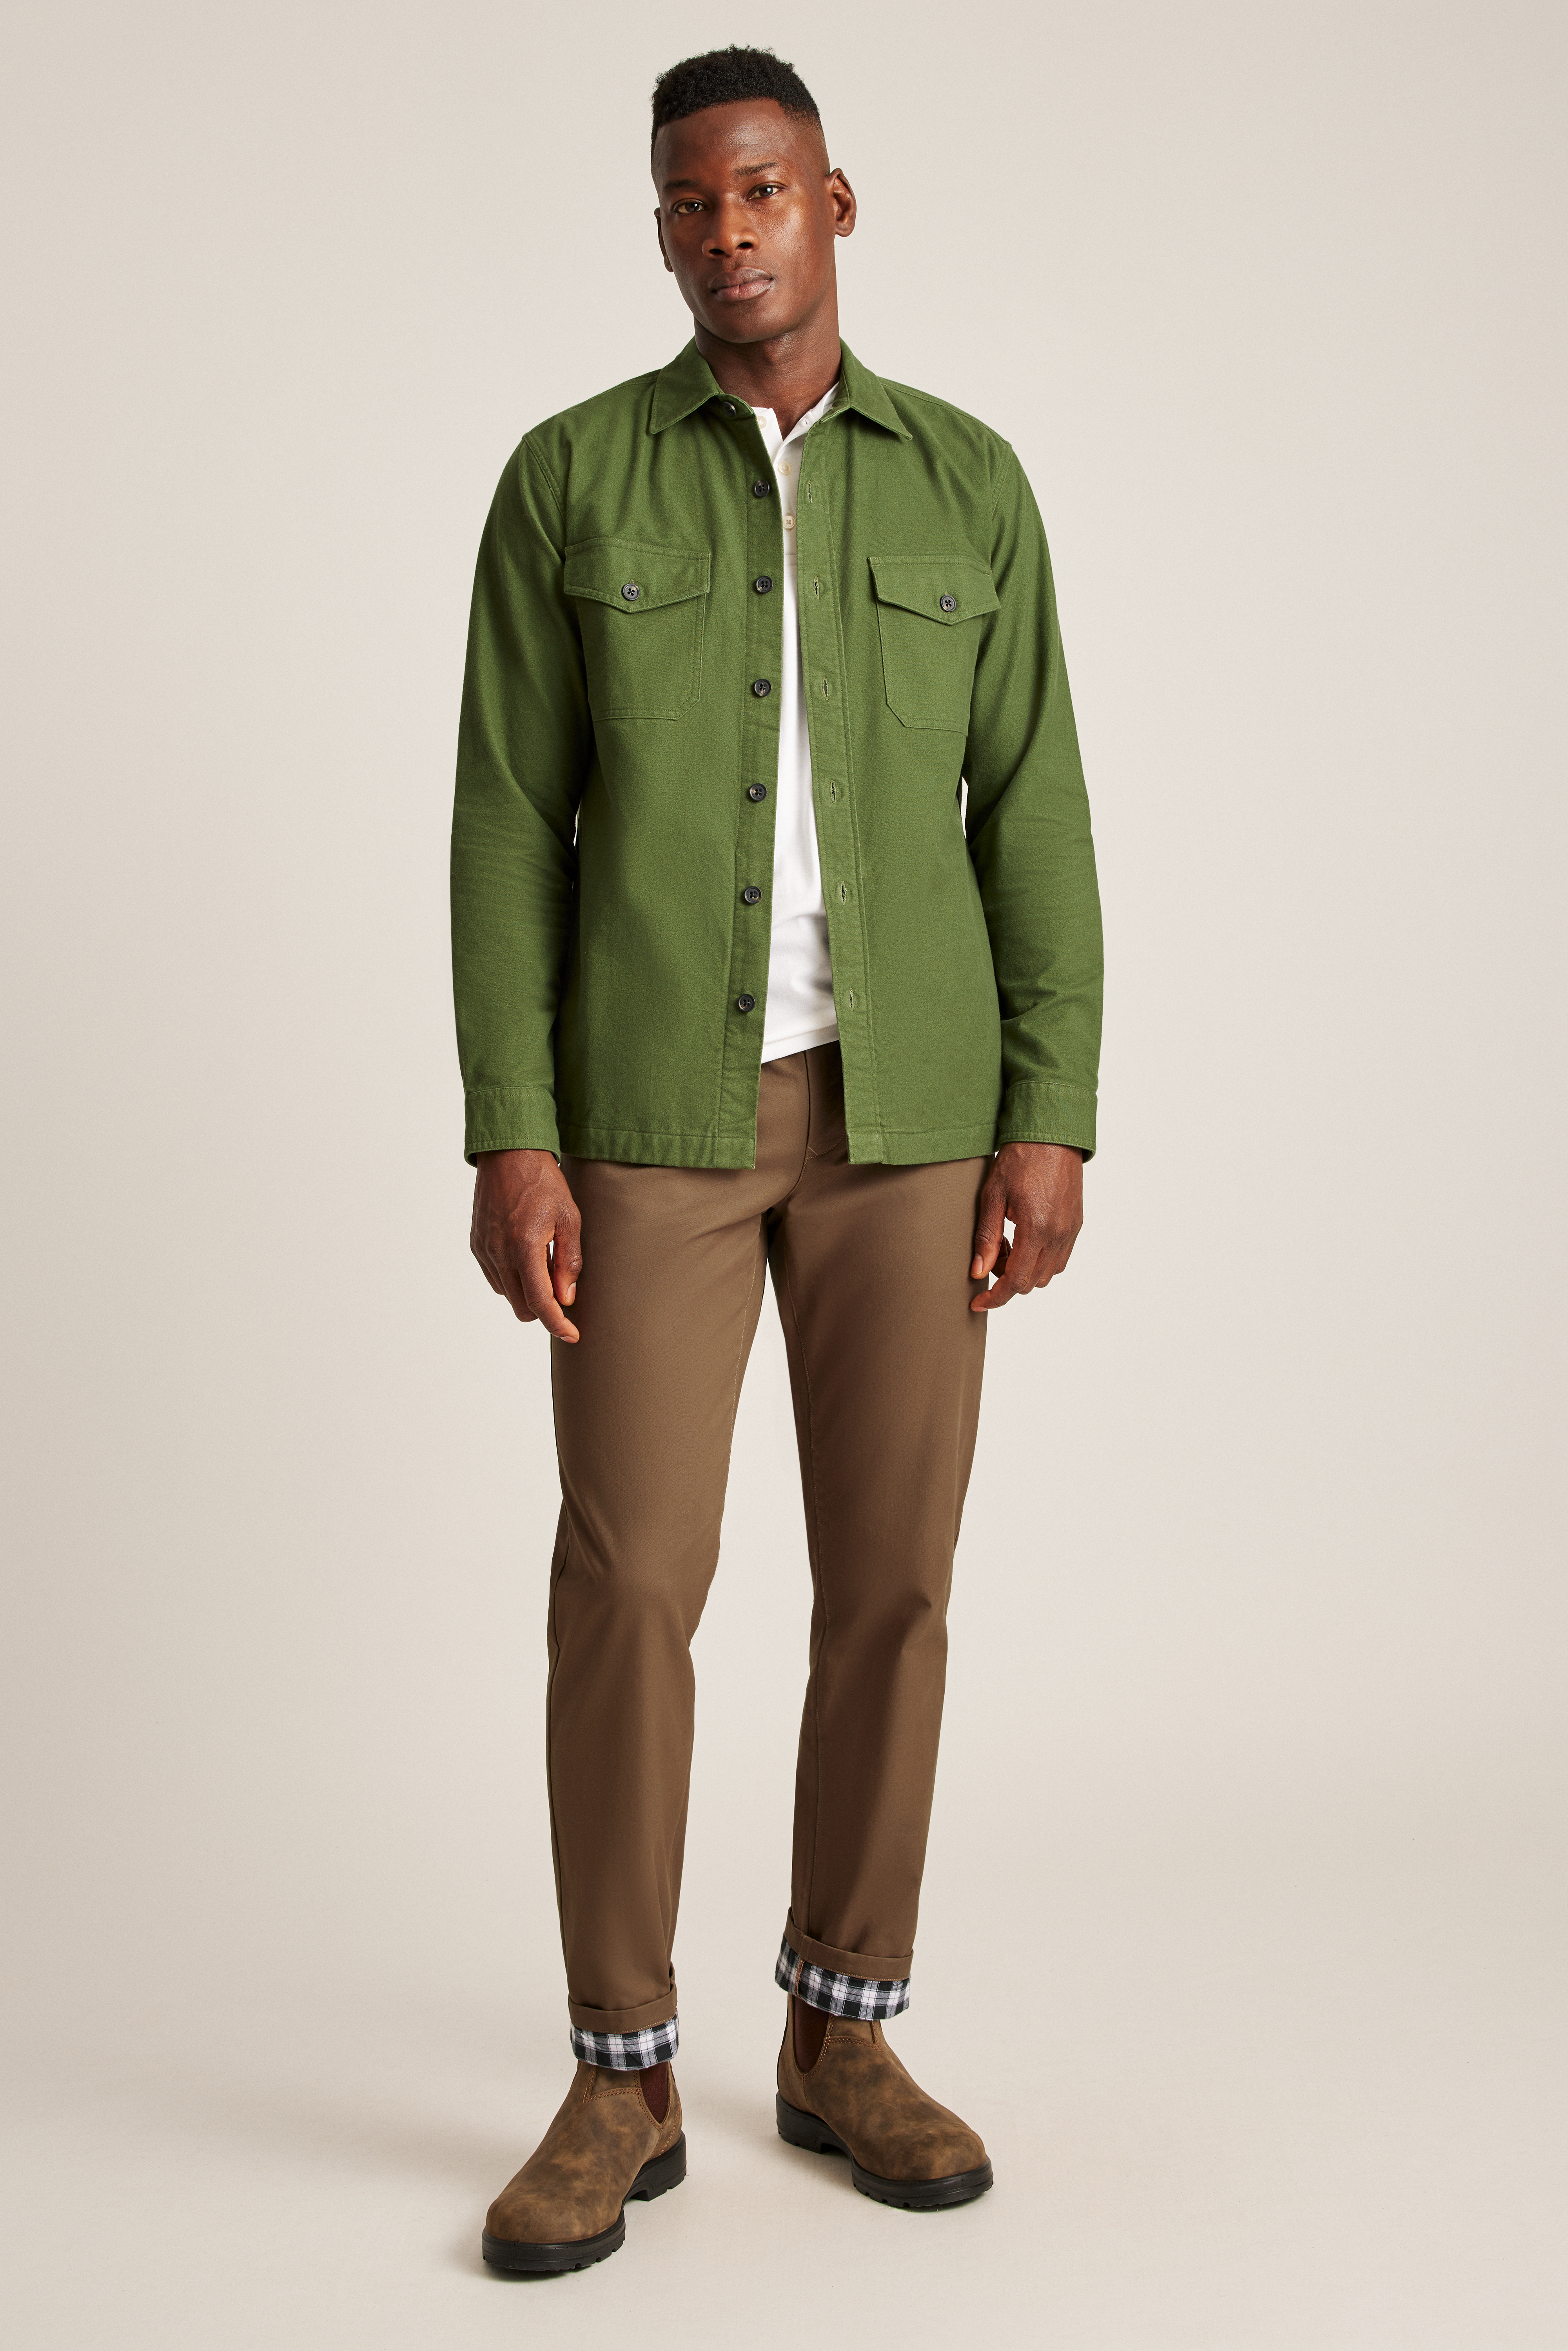 Flannel Lined Chinos | Bonobos